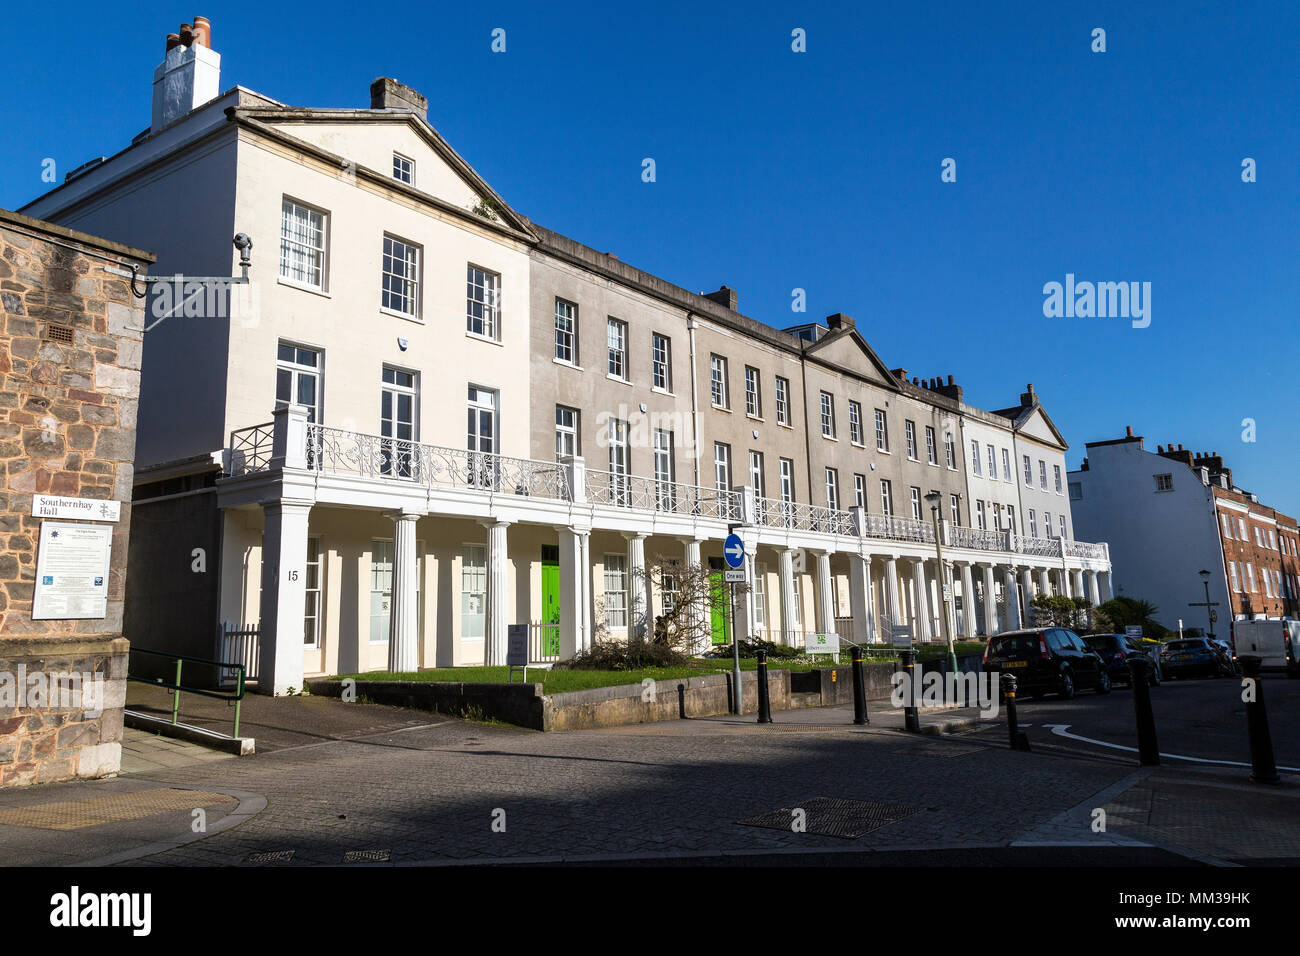 Southernhay East in Exeter is in the South West region of England. architectural or historical importance ,The dissenters ,chichester place exeter,Geo Stock Photo